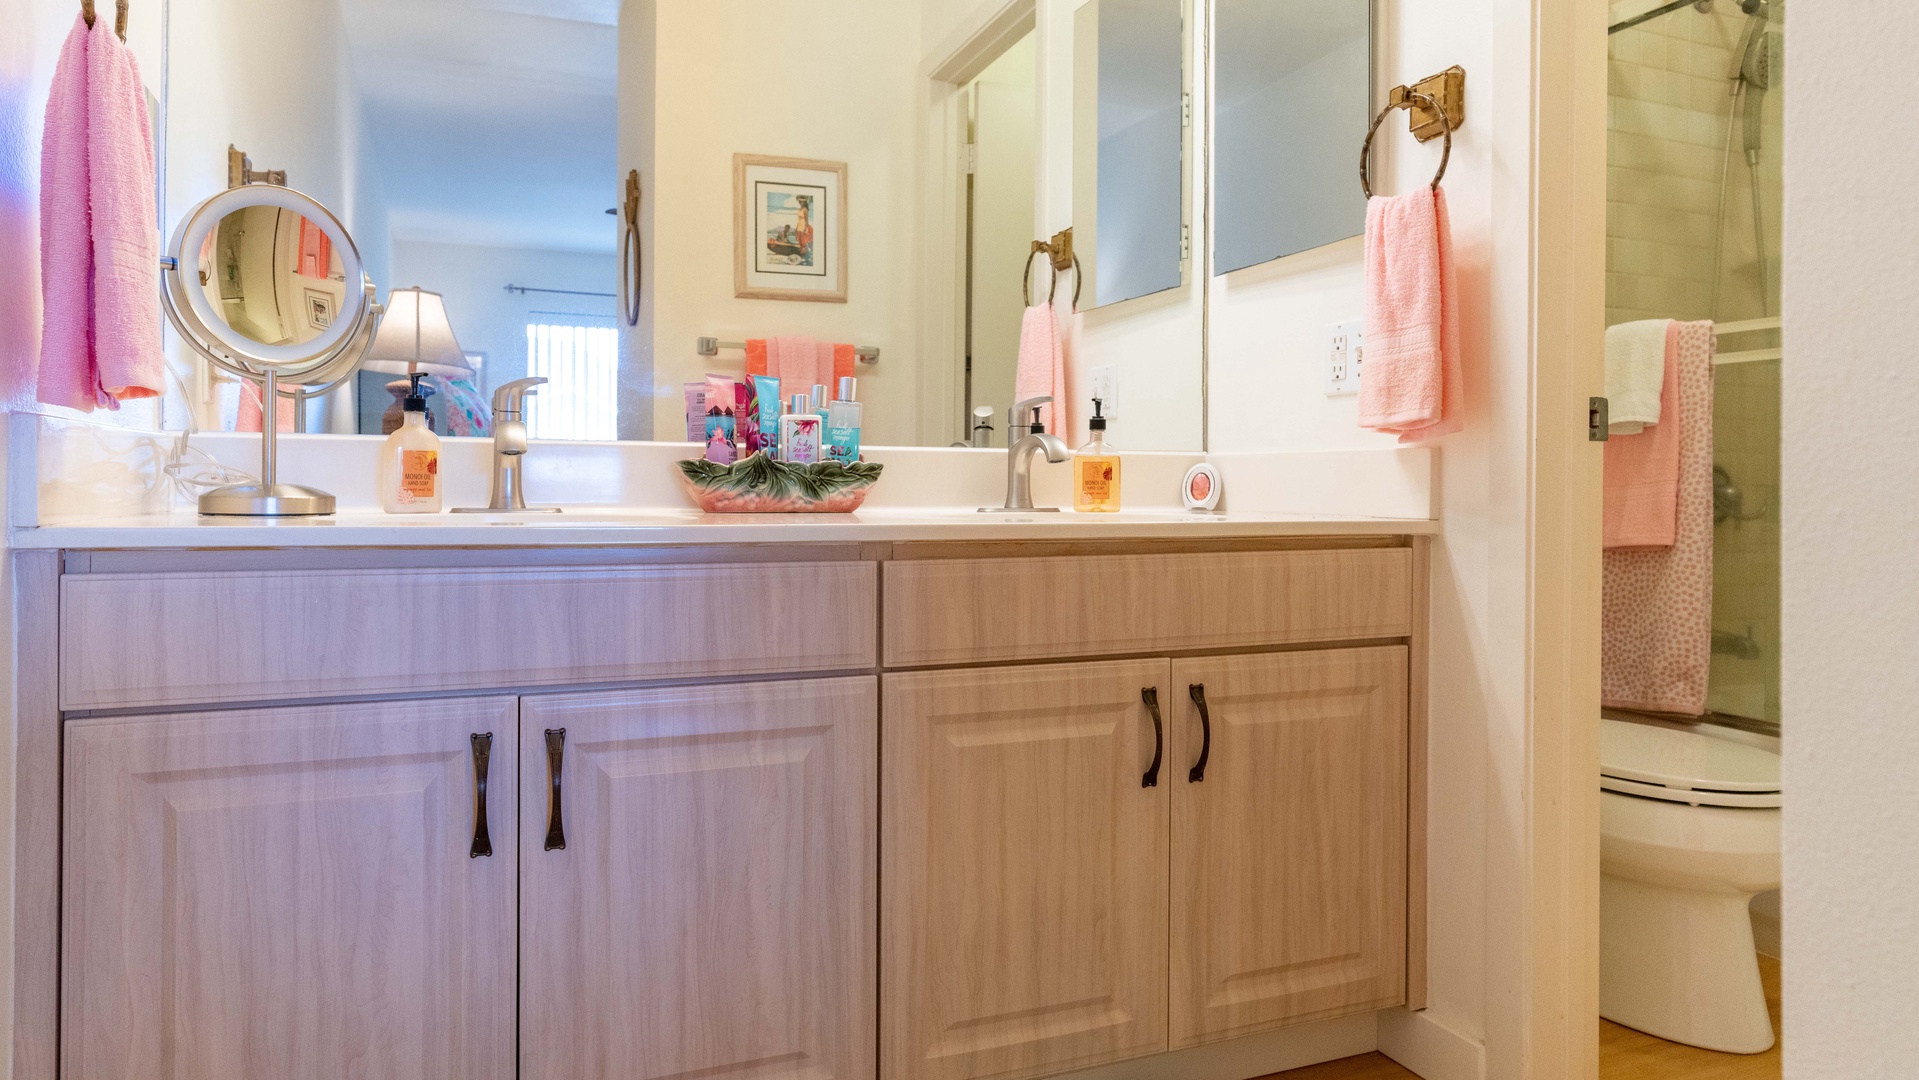 Kapolei Vacation Rentals, Fairways at Ko Olina 4A - The primary guest bathroom features a double vanity and ample lighting.